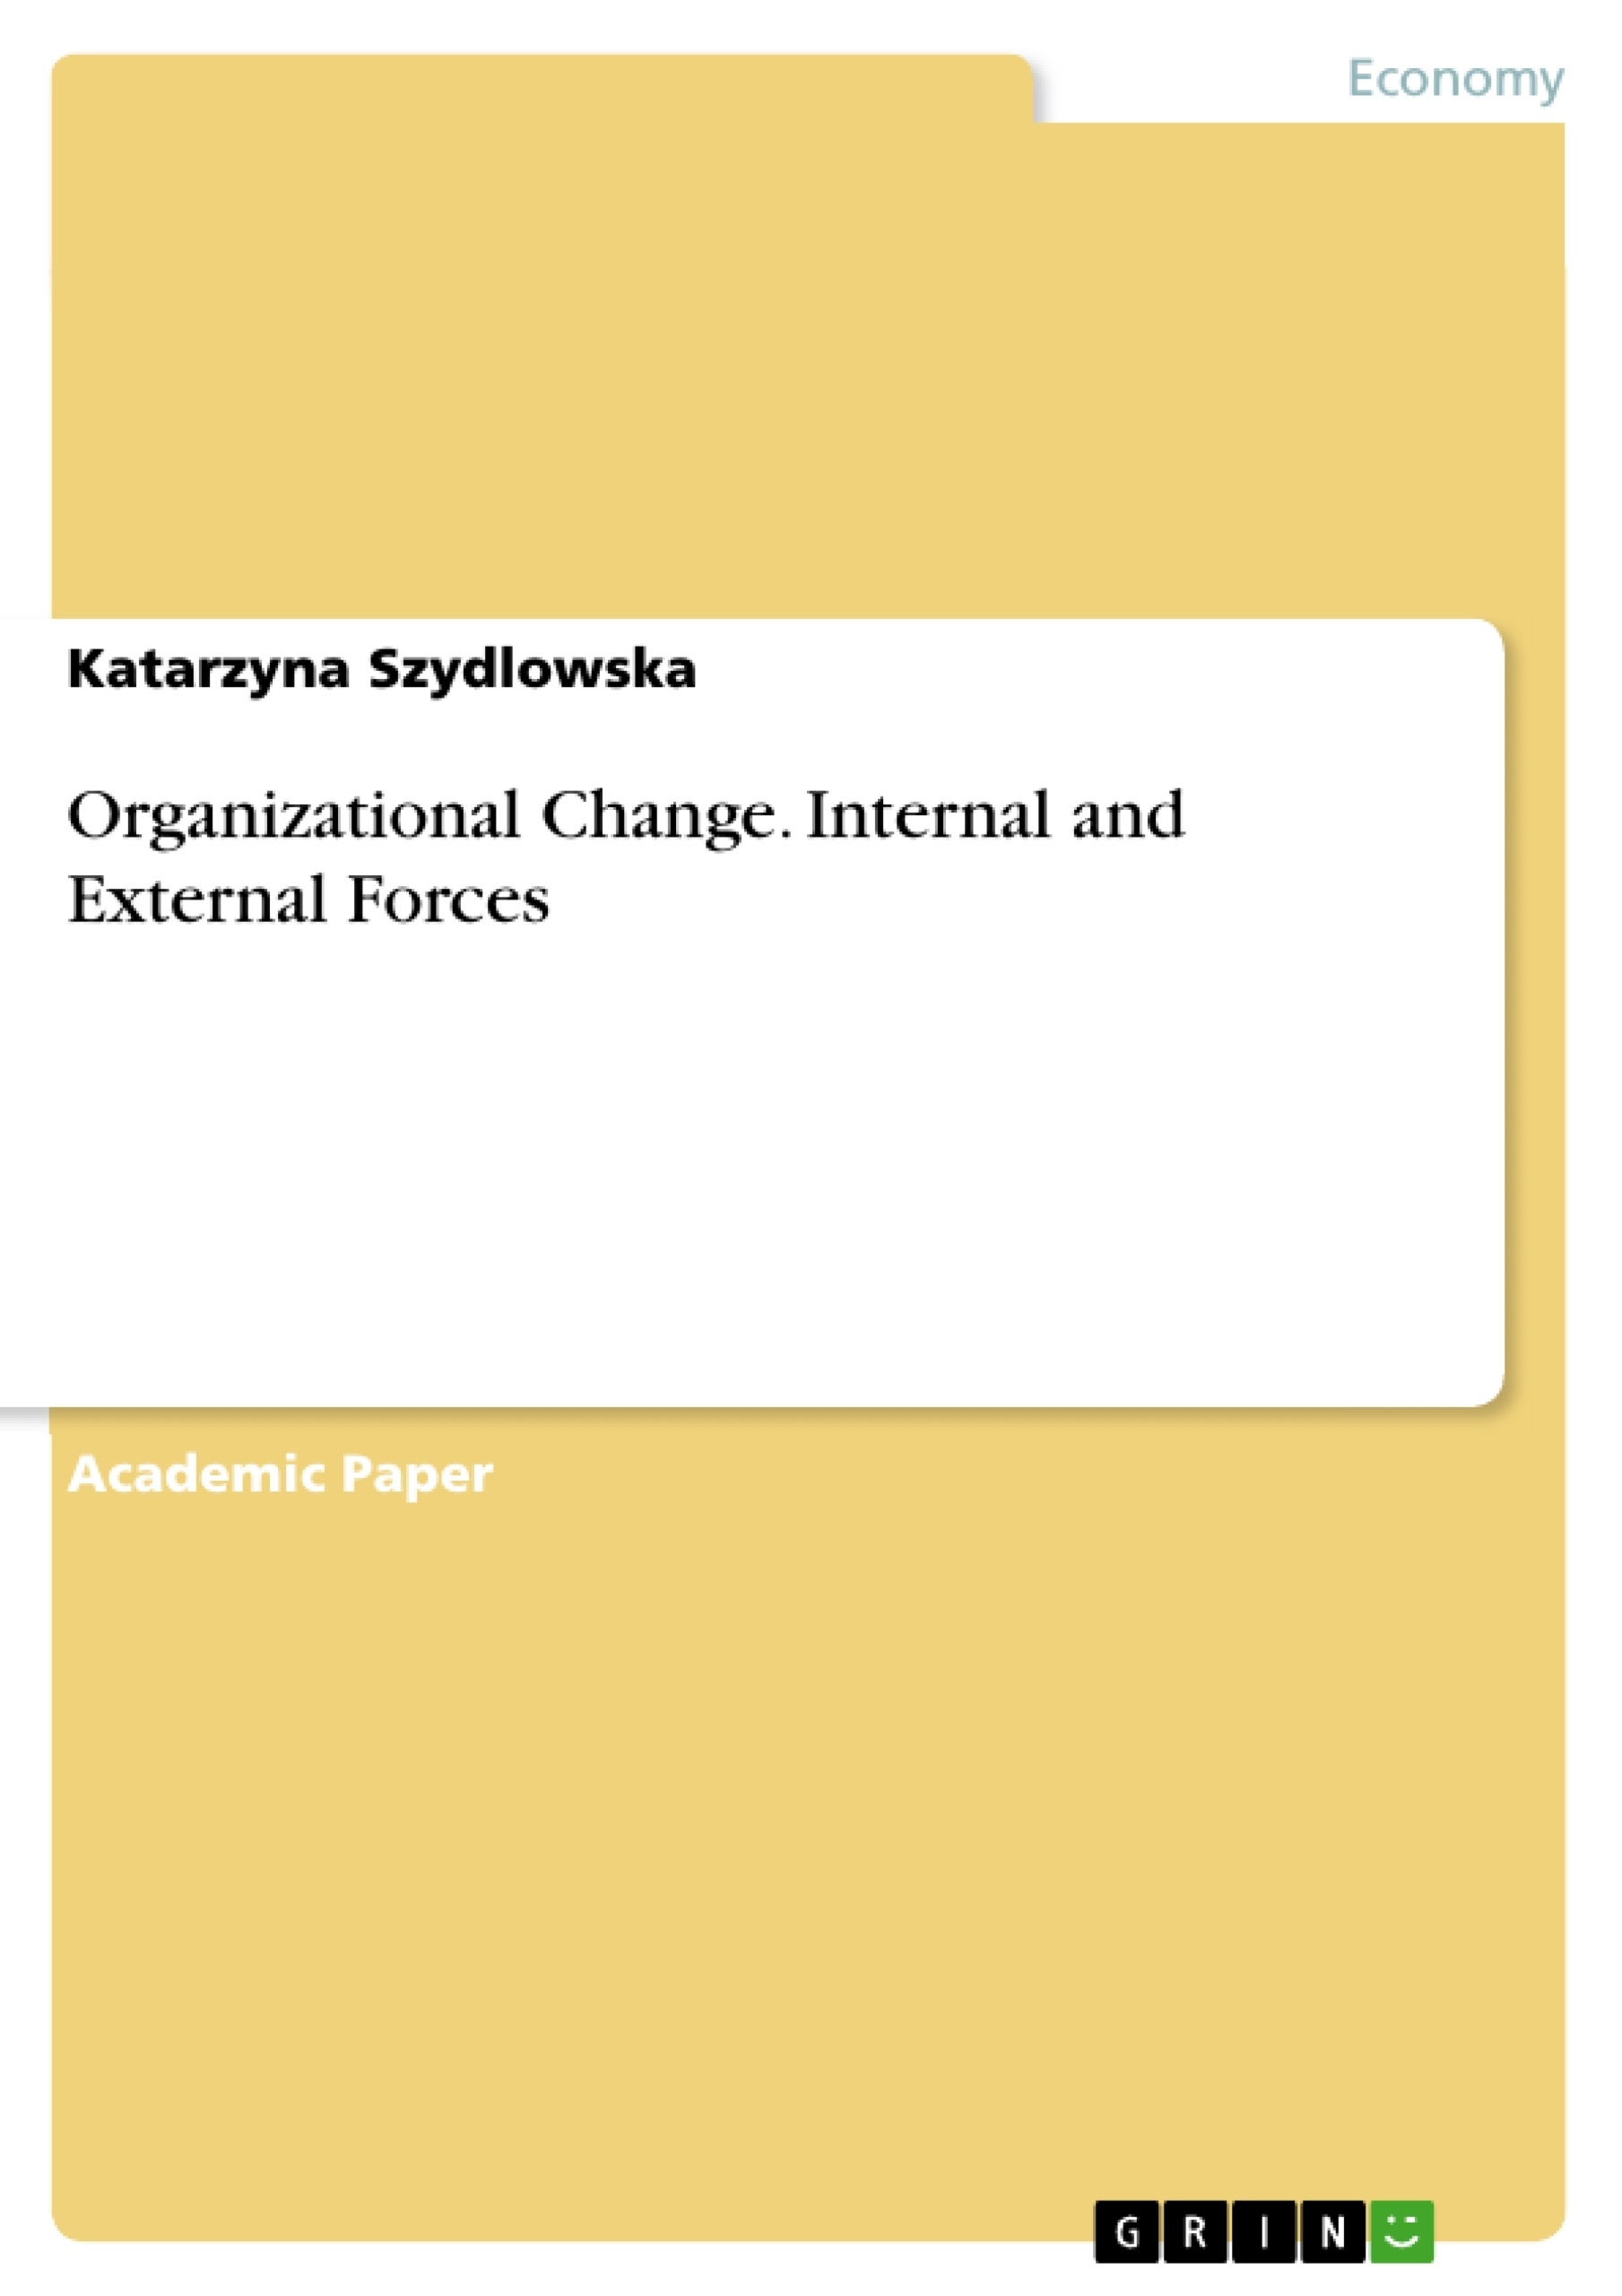 Title: Organizational Change. Internal and External Forces